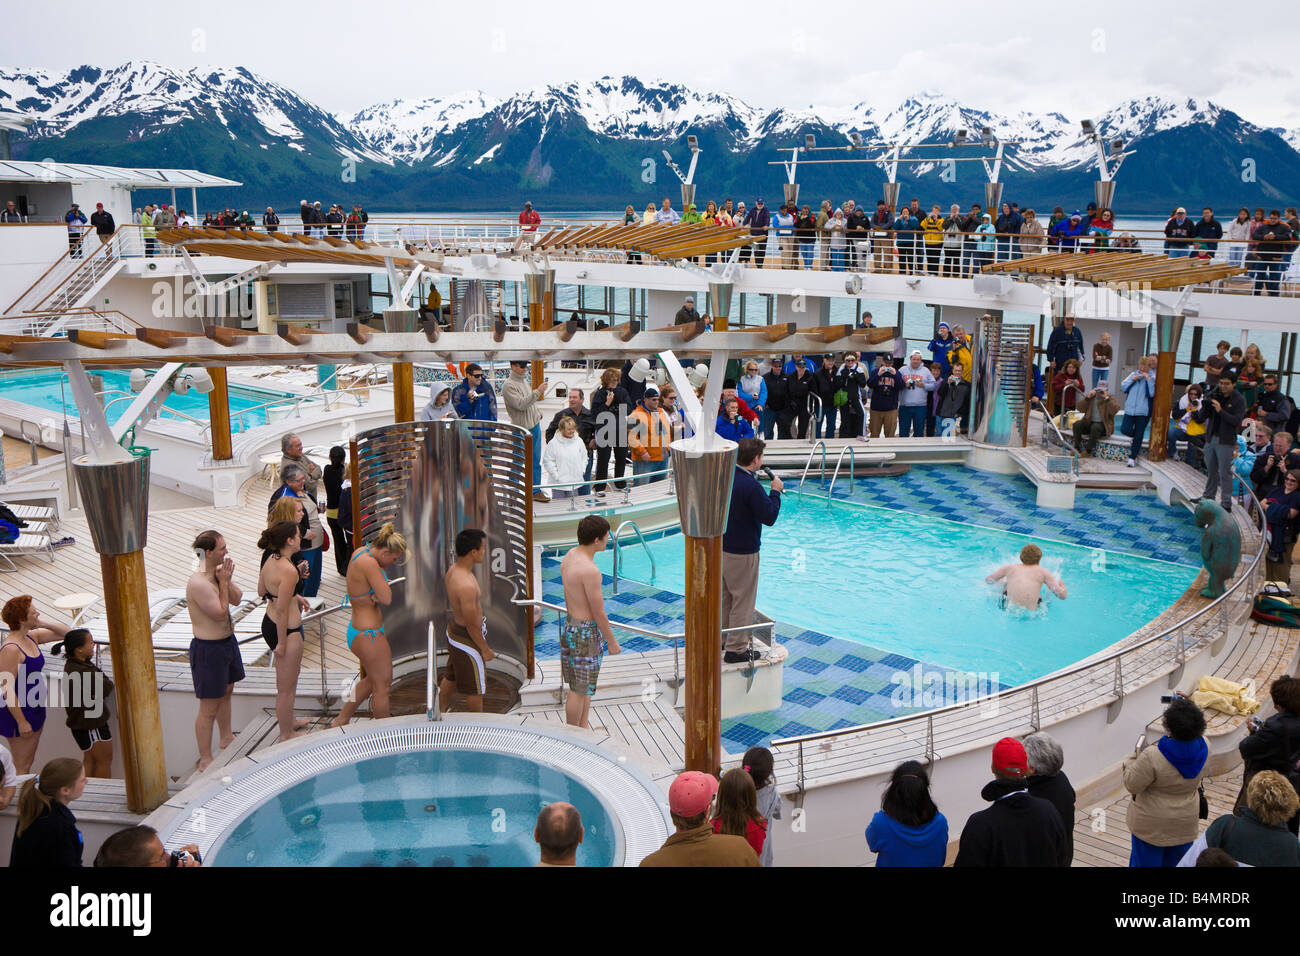 Cruise passengers join the Polar Bear Club by jumping into freezing swimming pool water near Hubbard Glacier in Alaska Stock Photo